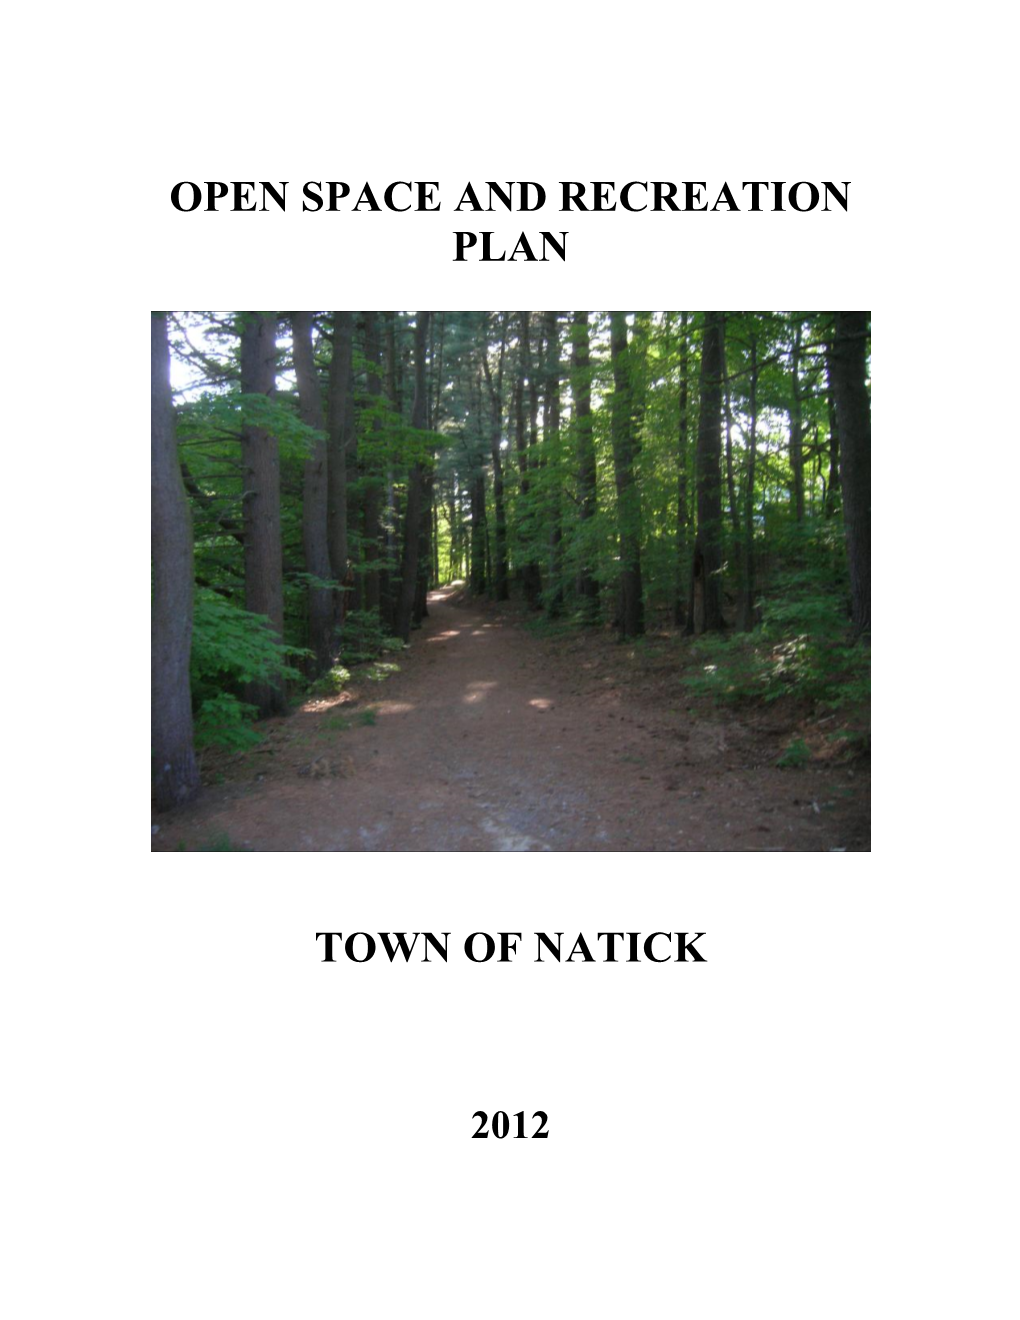 Open Space and Recreation Plan Town of Natick